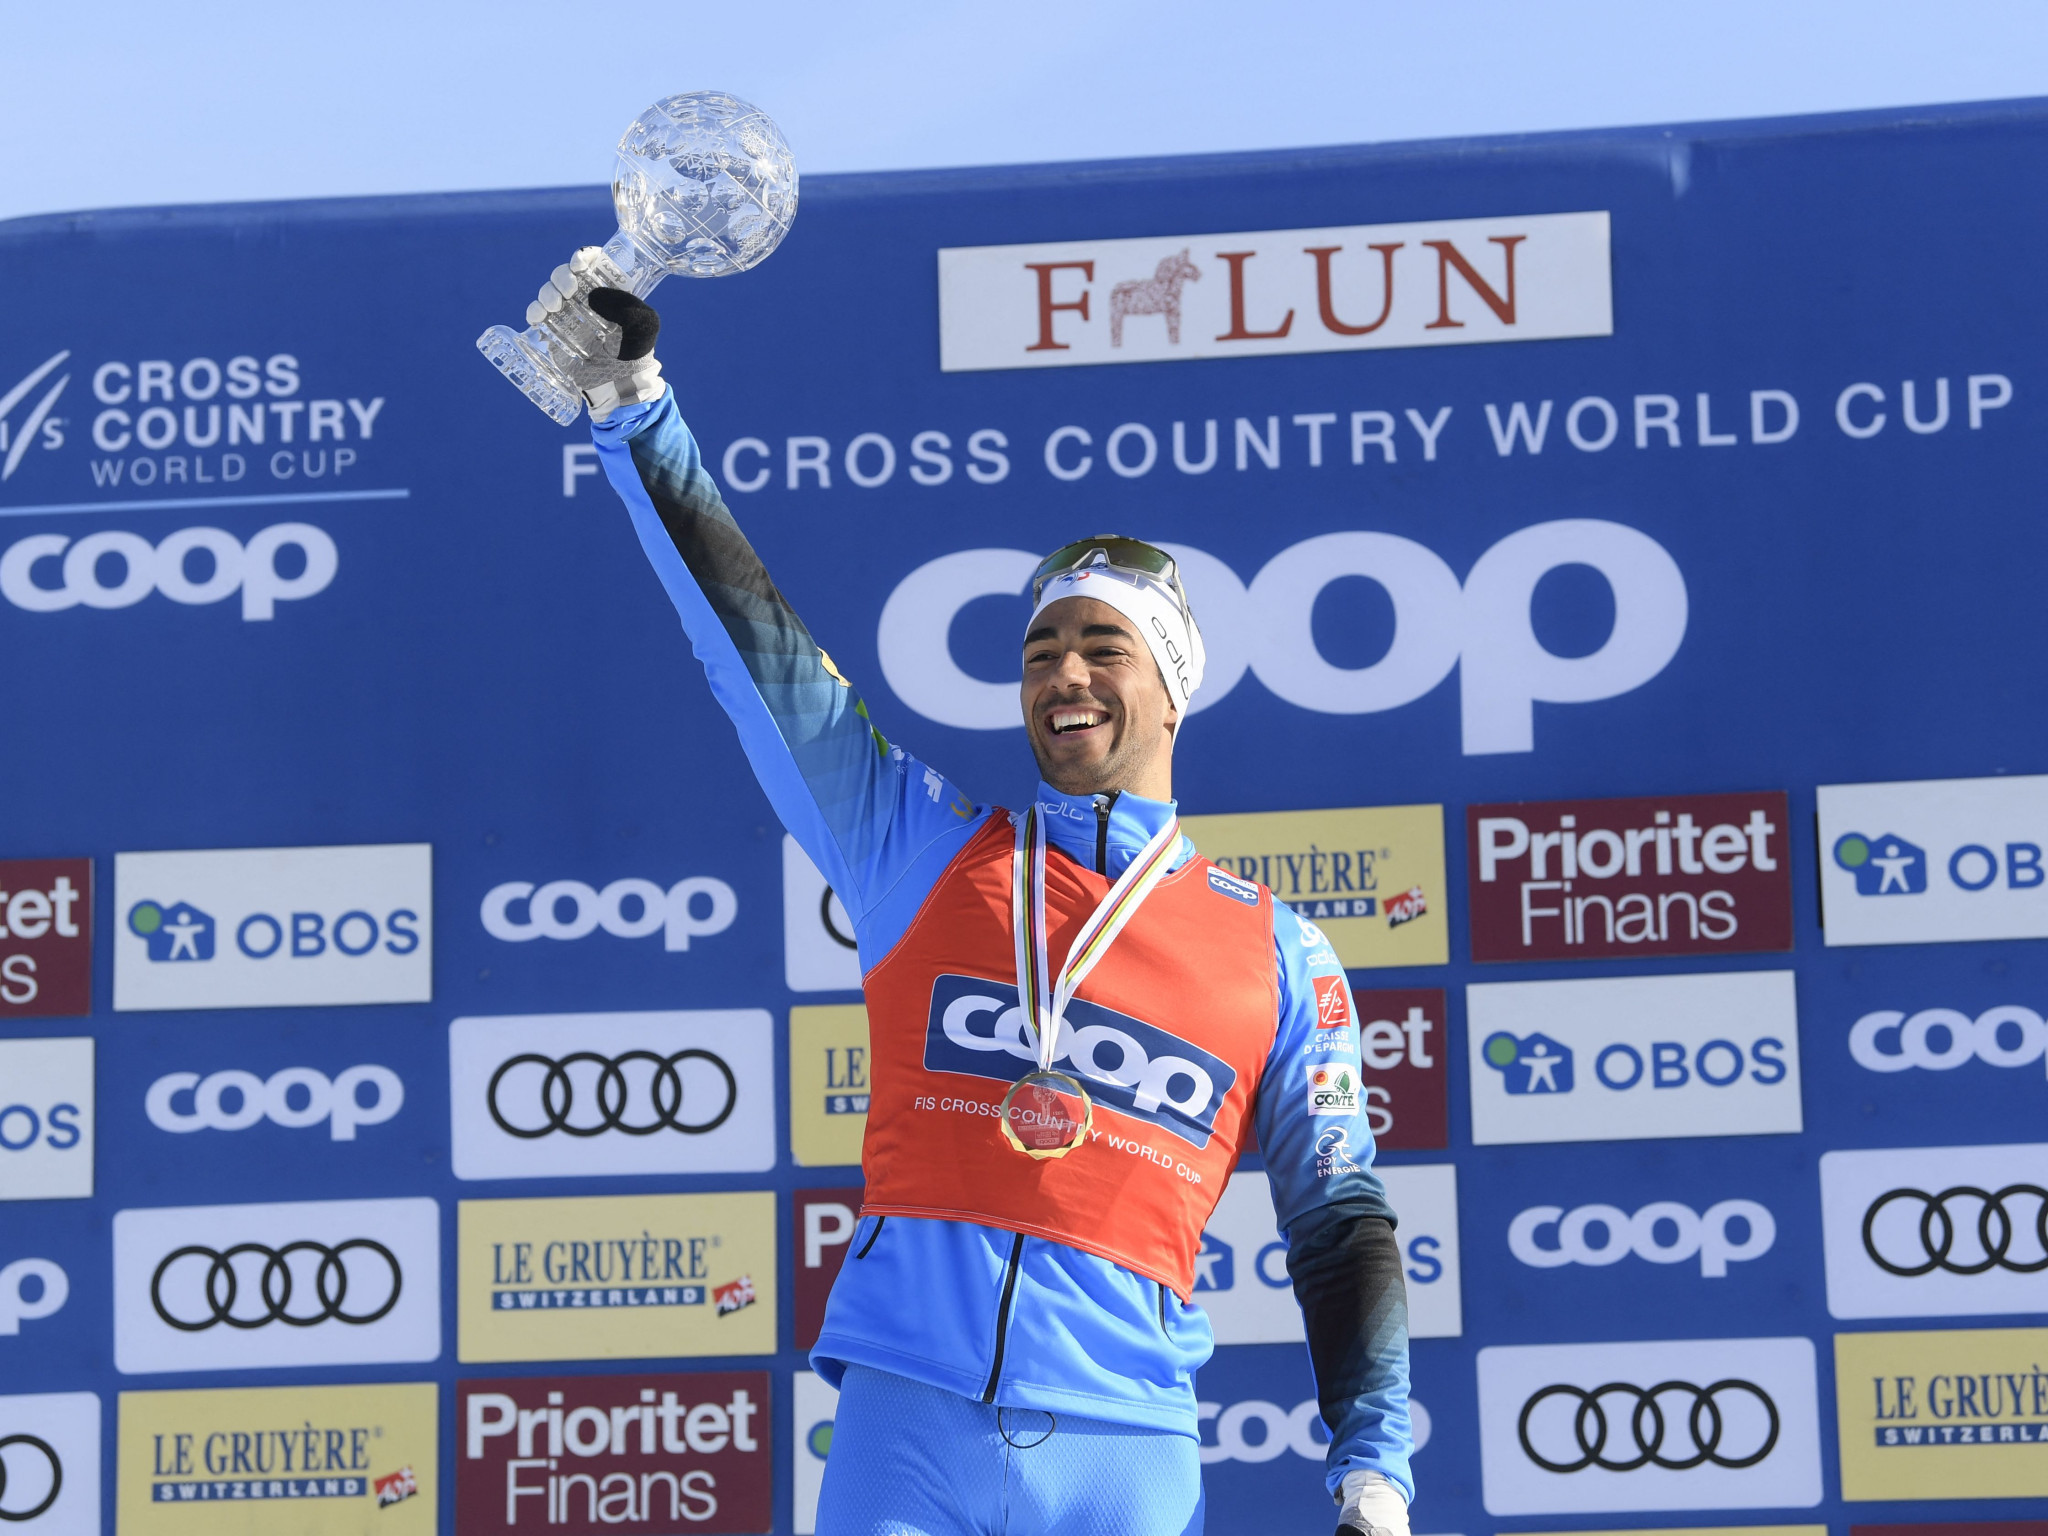 Richard Jouve claimed the sprint distance crystal globe ©Getty Images